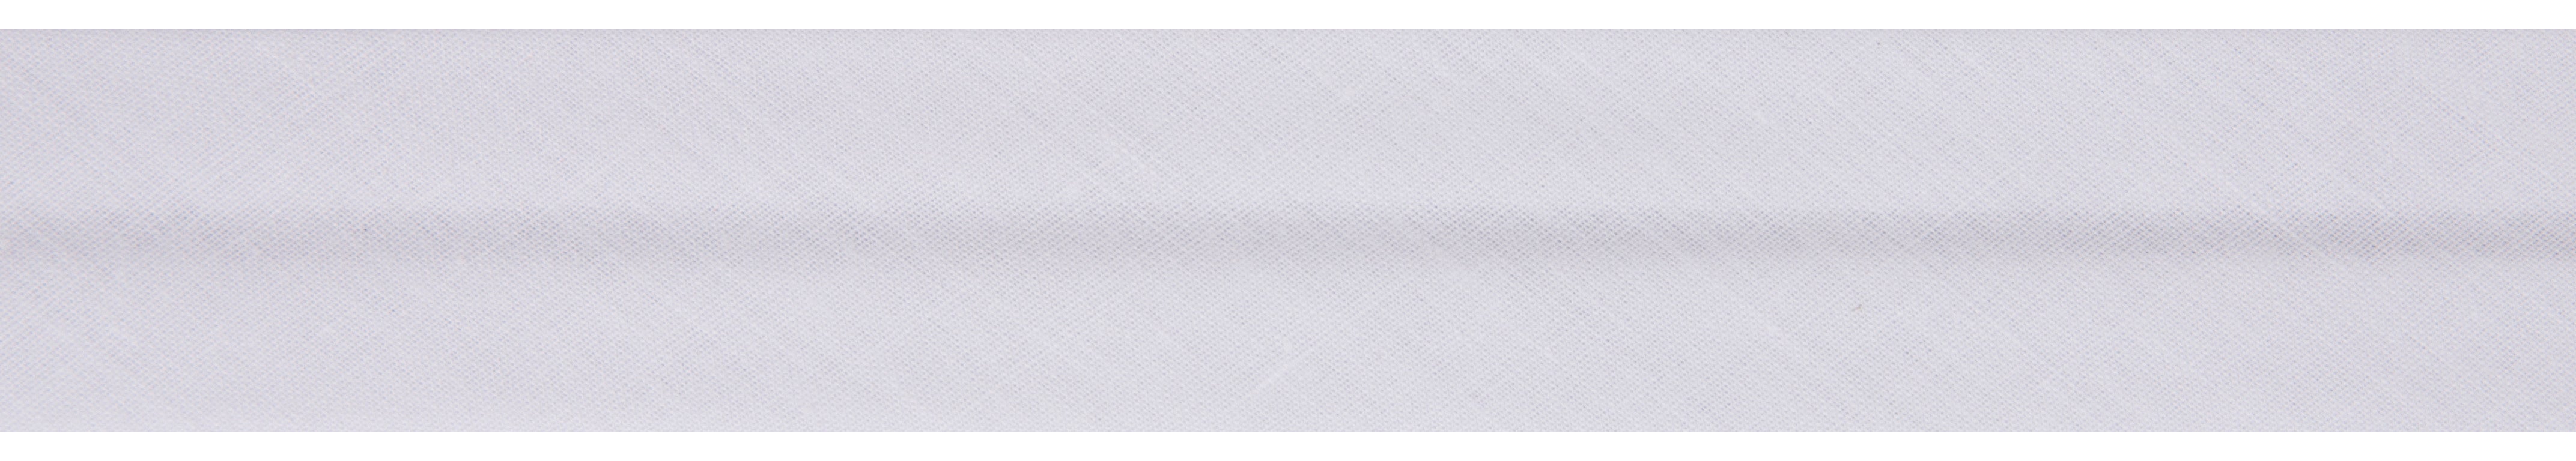 20m roll of White Bias Binding | 25mm width from Jaycotts Sewing Supplies